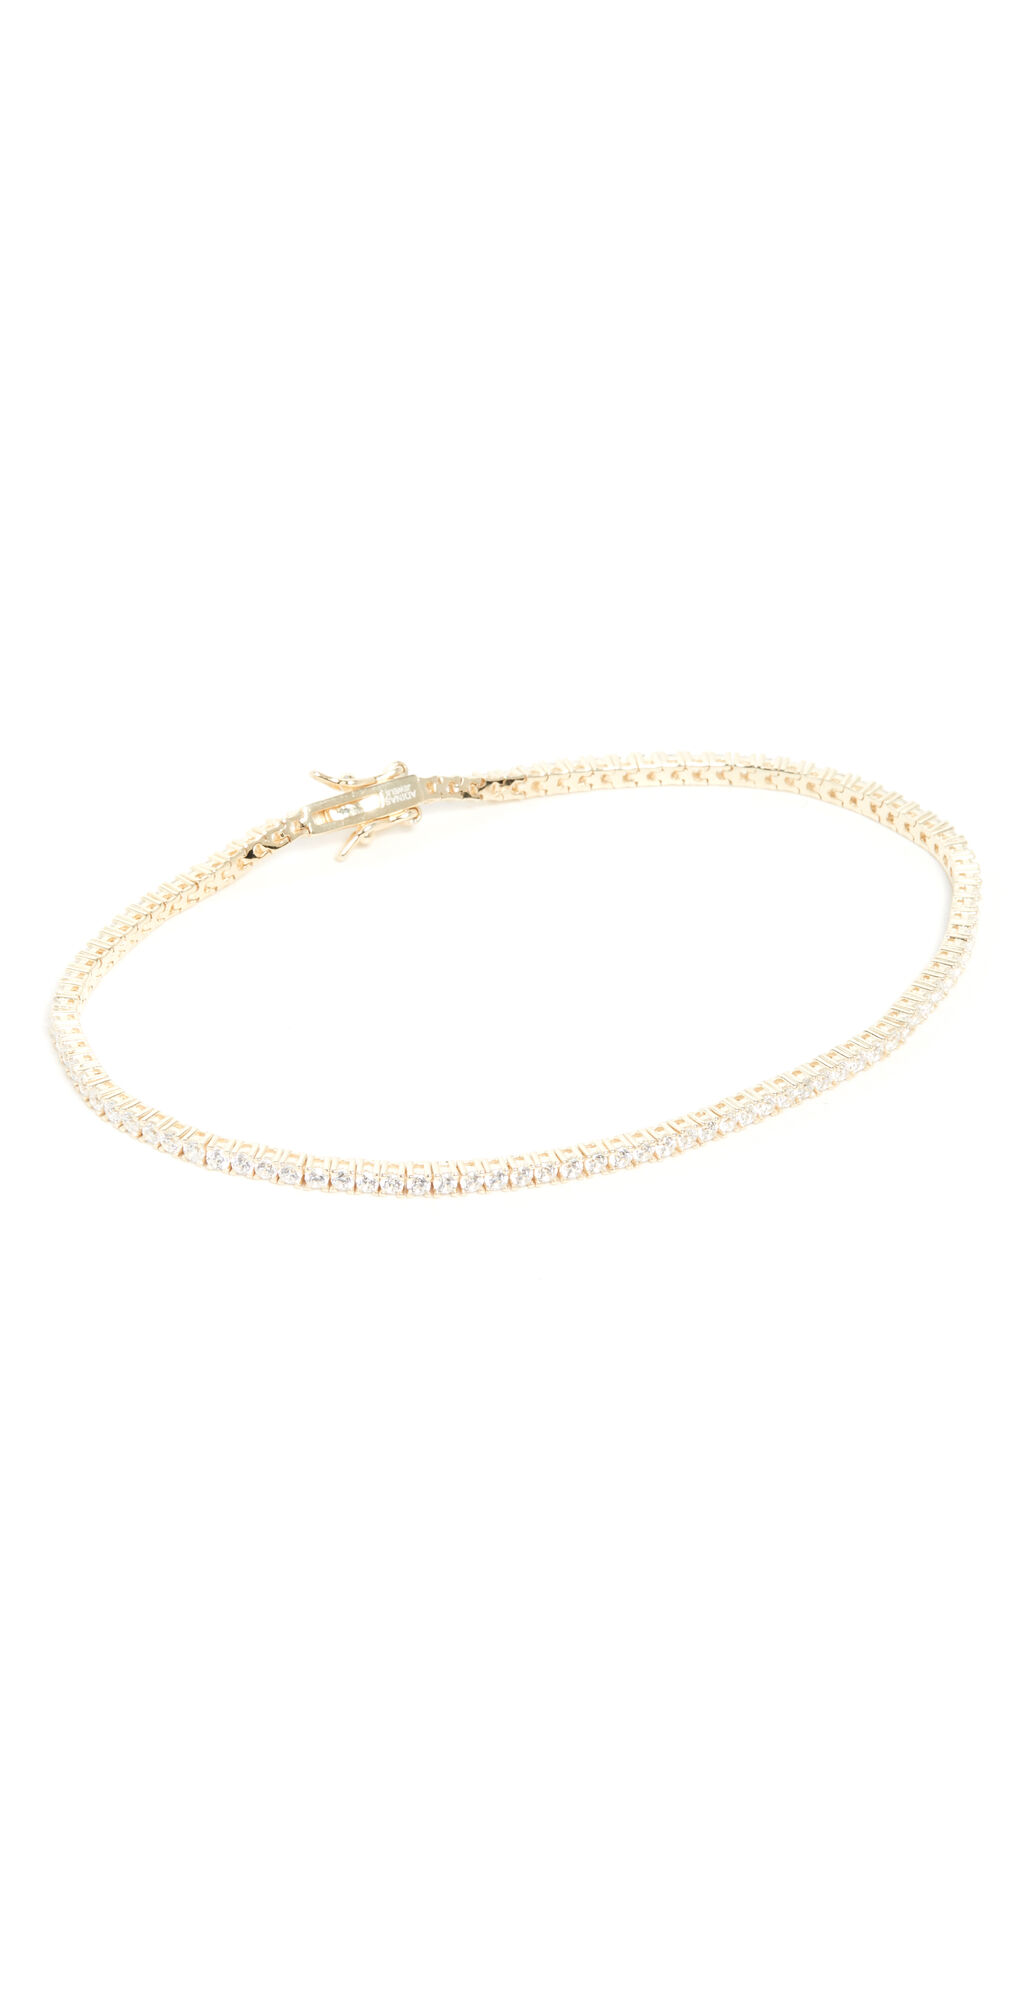 Adina's Jewels Adina Tennis Anklet Gold One Size  Gold  size:One Size